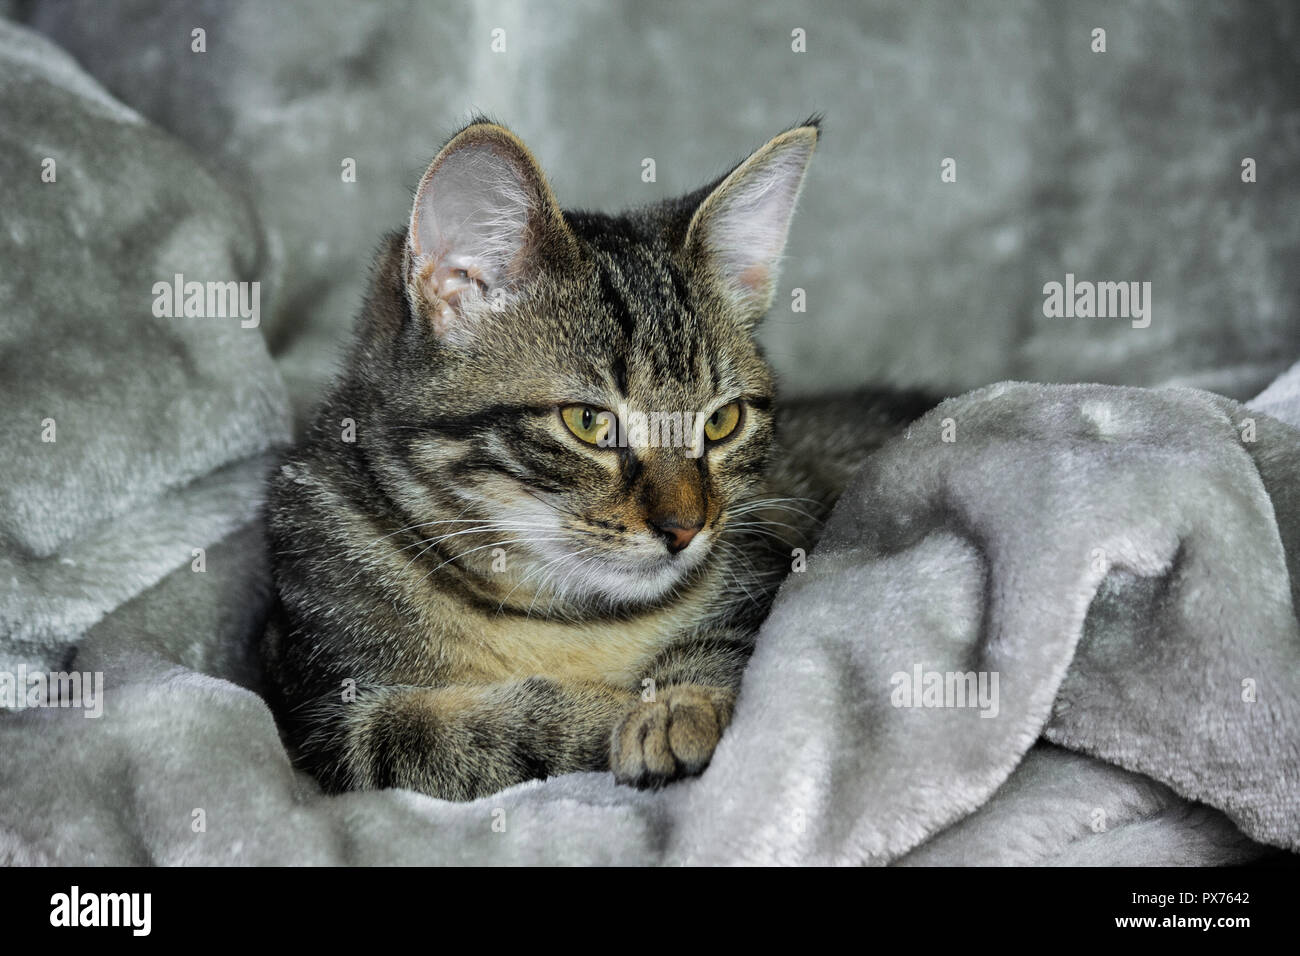 small mongrel striped kitten is lying on a gray rug, calmly, wrapped in a warm material, drowsy, yellow with green eyes and an orange nose, close-up, Stock Photo